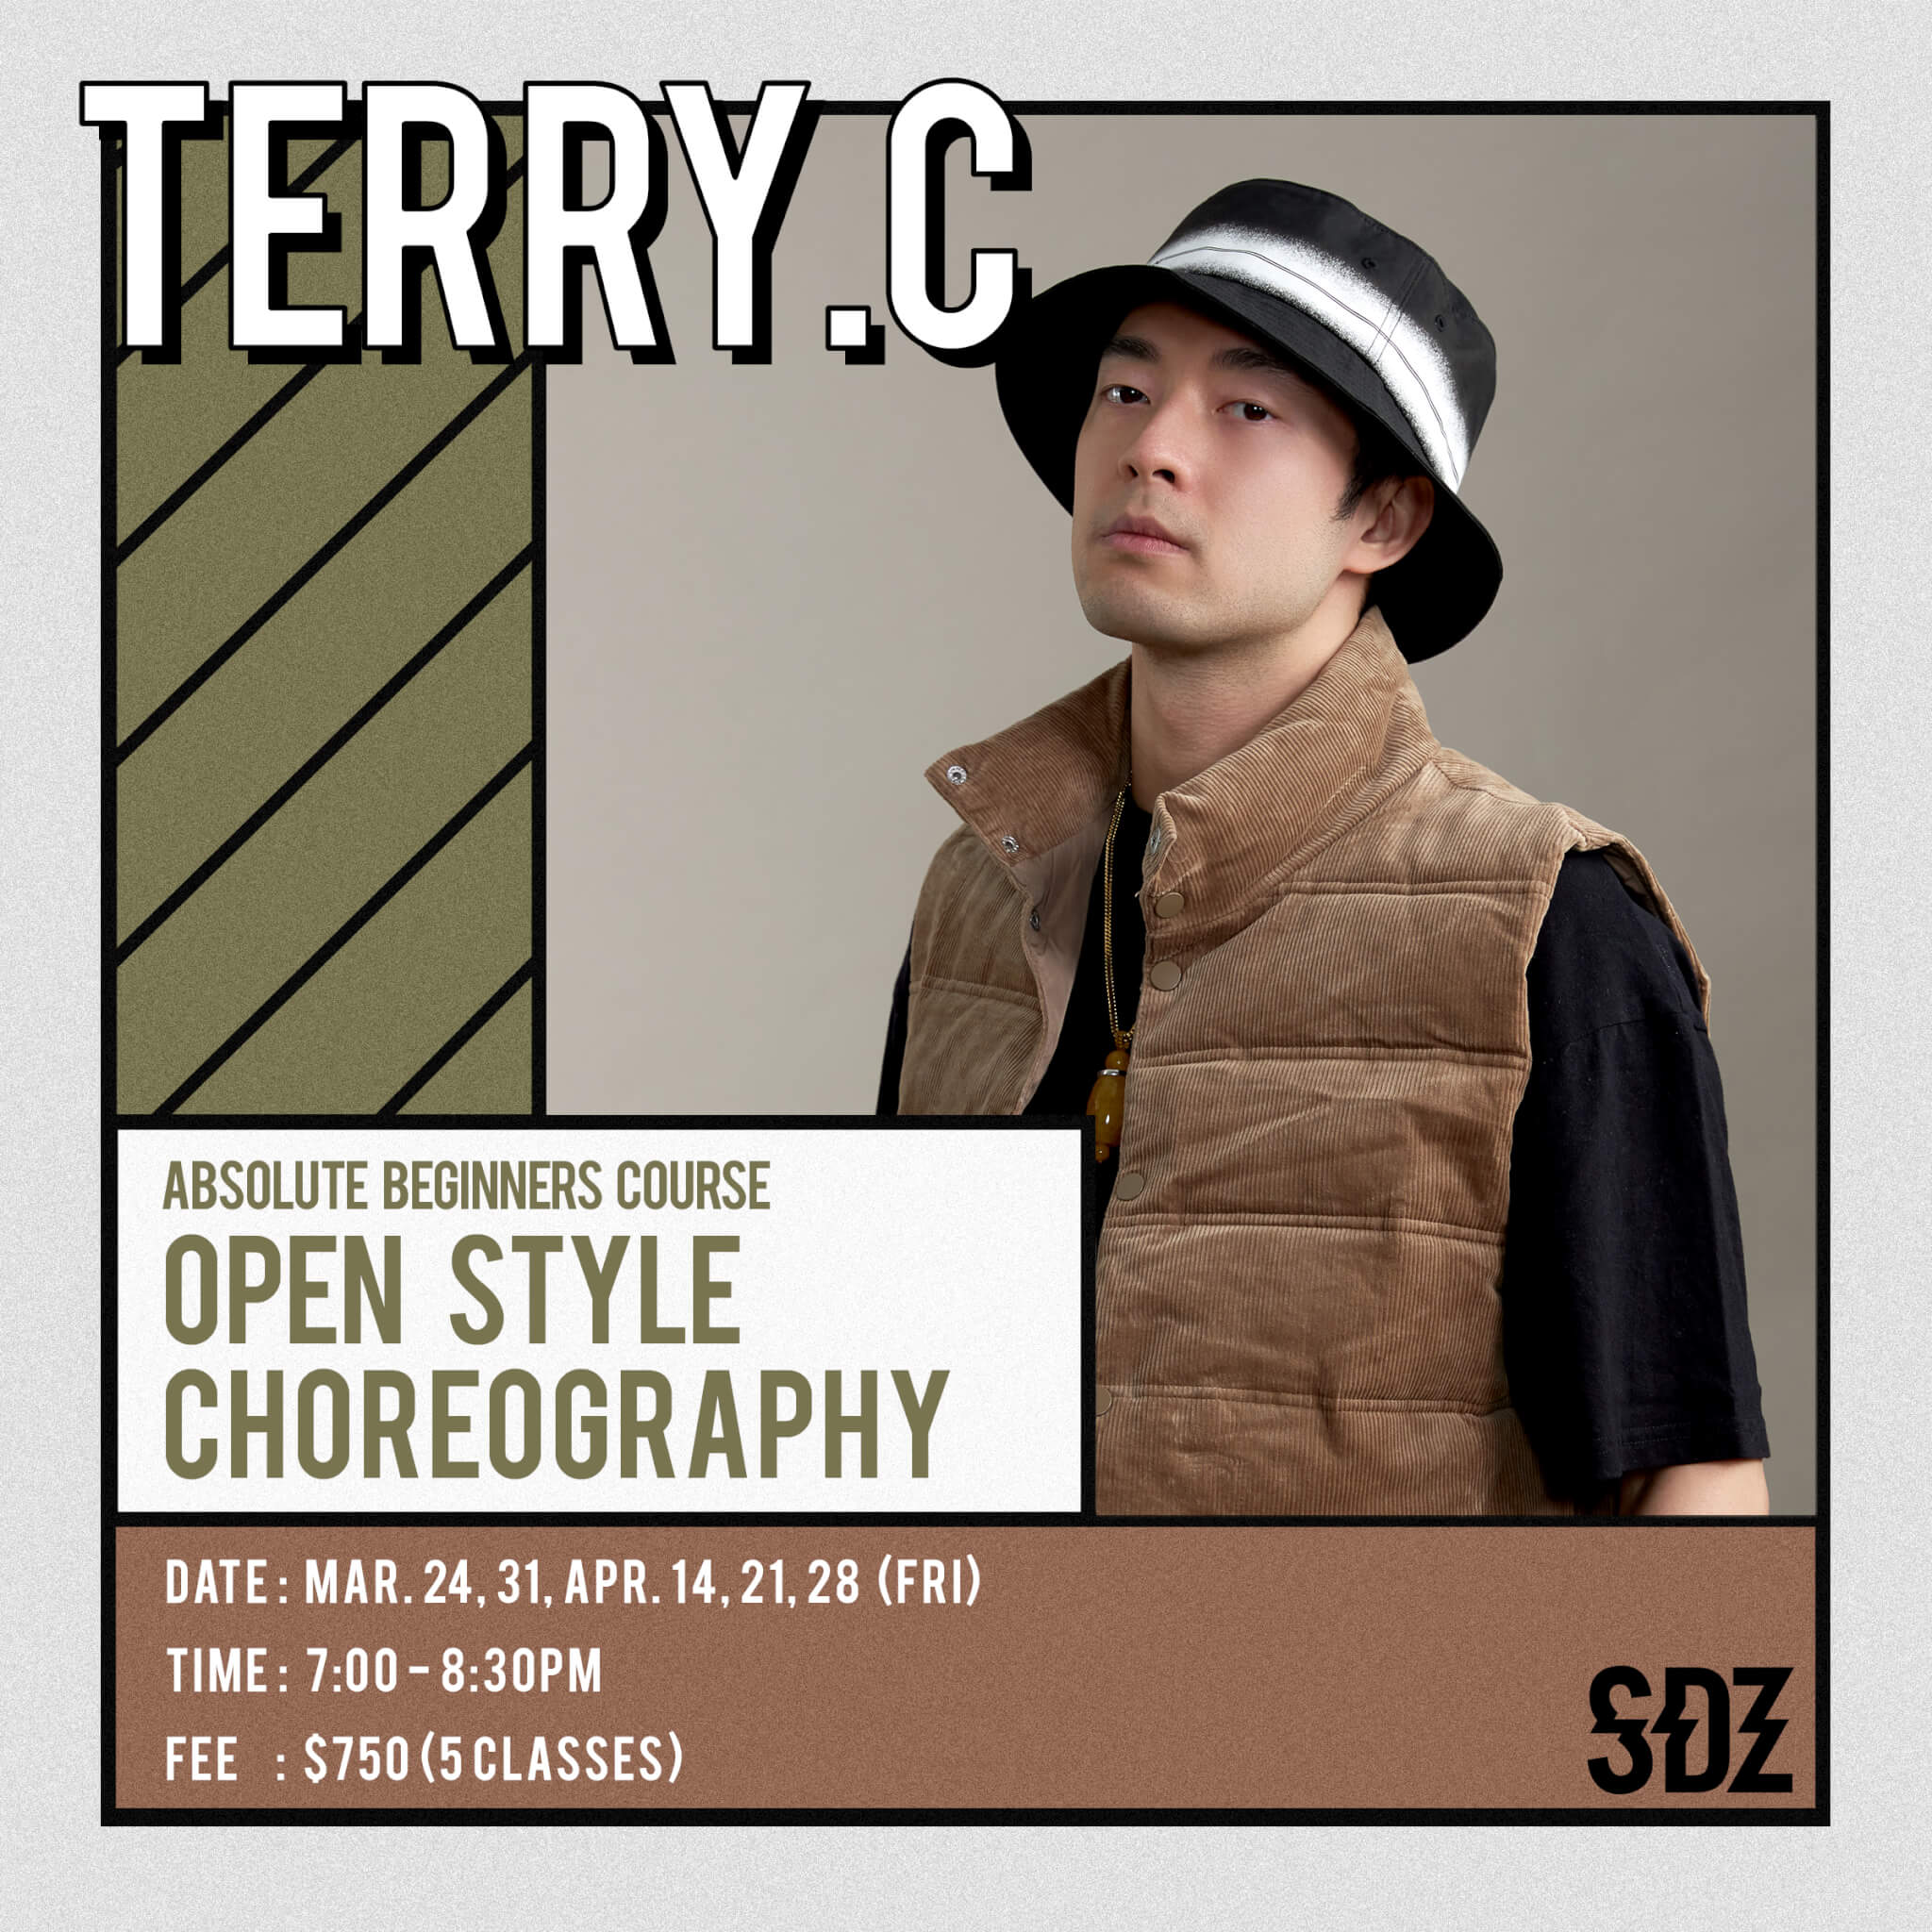 Absolute Beginners Course - Open Style Choreography - Terry.C